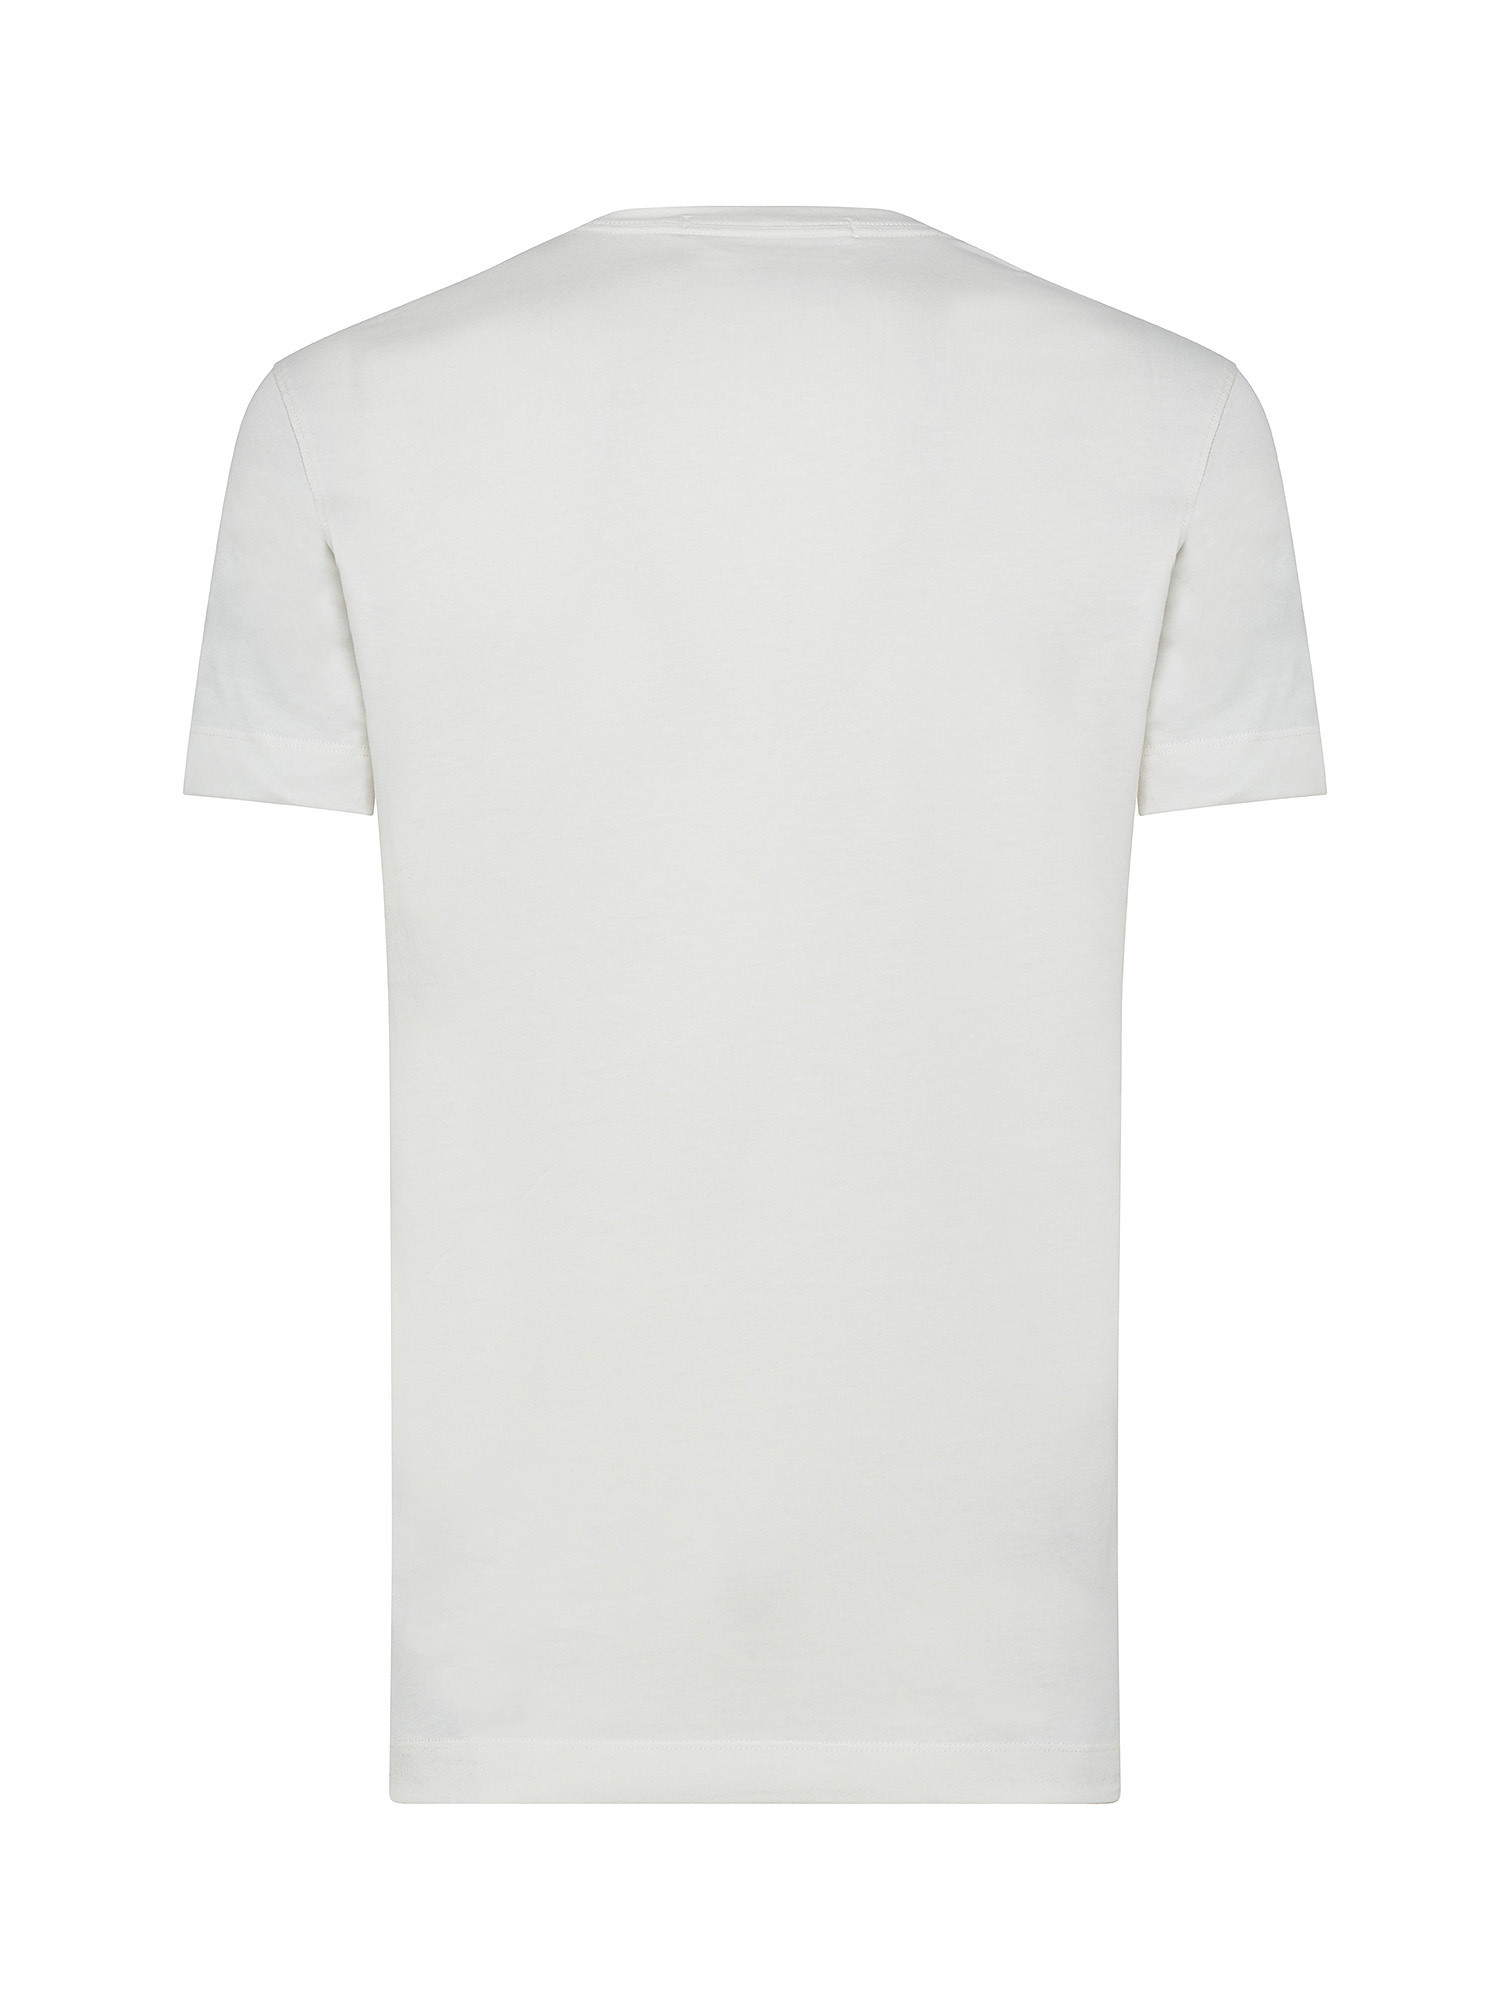 Calvin Klein Jeans - Slim fit cotton T-shirt with logo, White, large image number 1